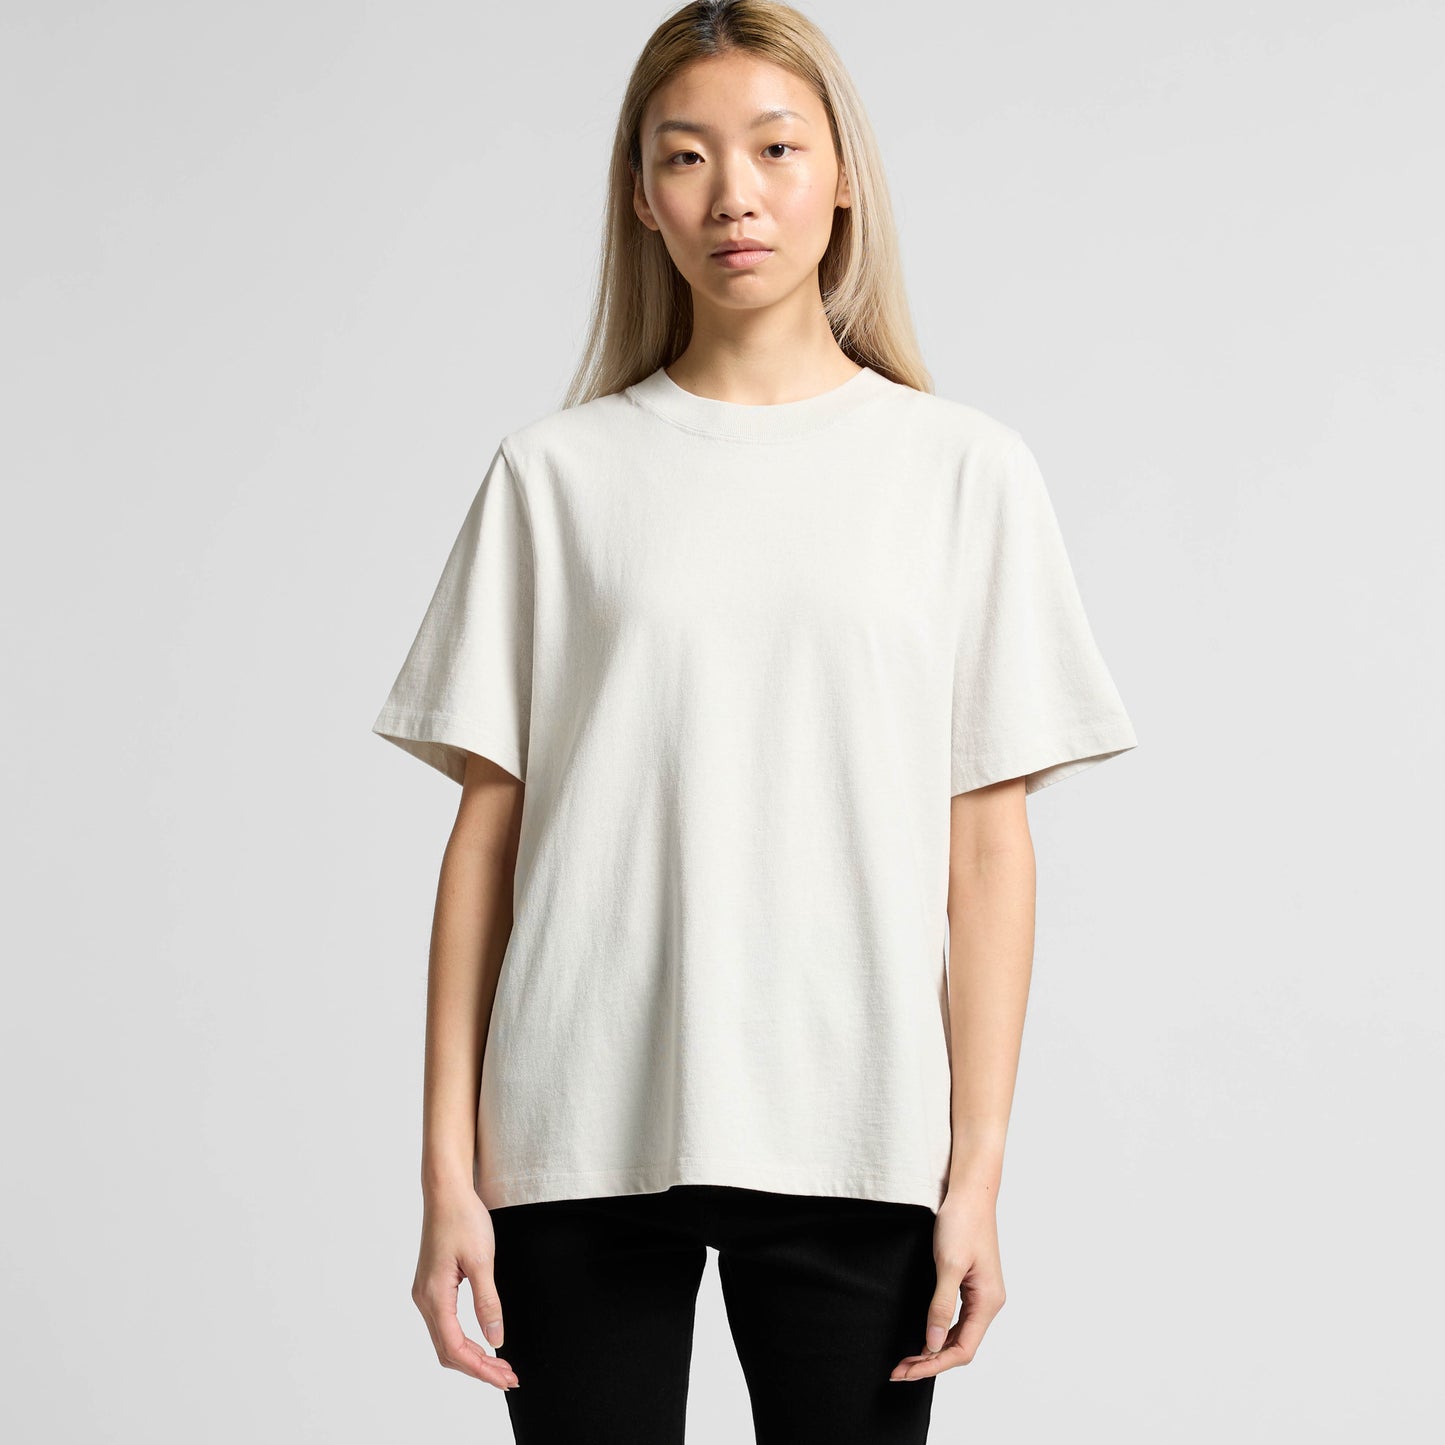 AS Colour Wo's Heavy Faded Tee - 4082